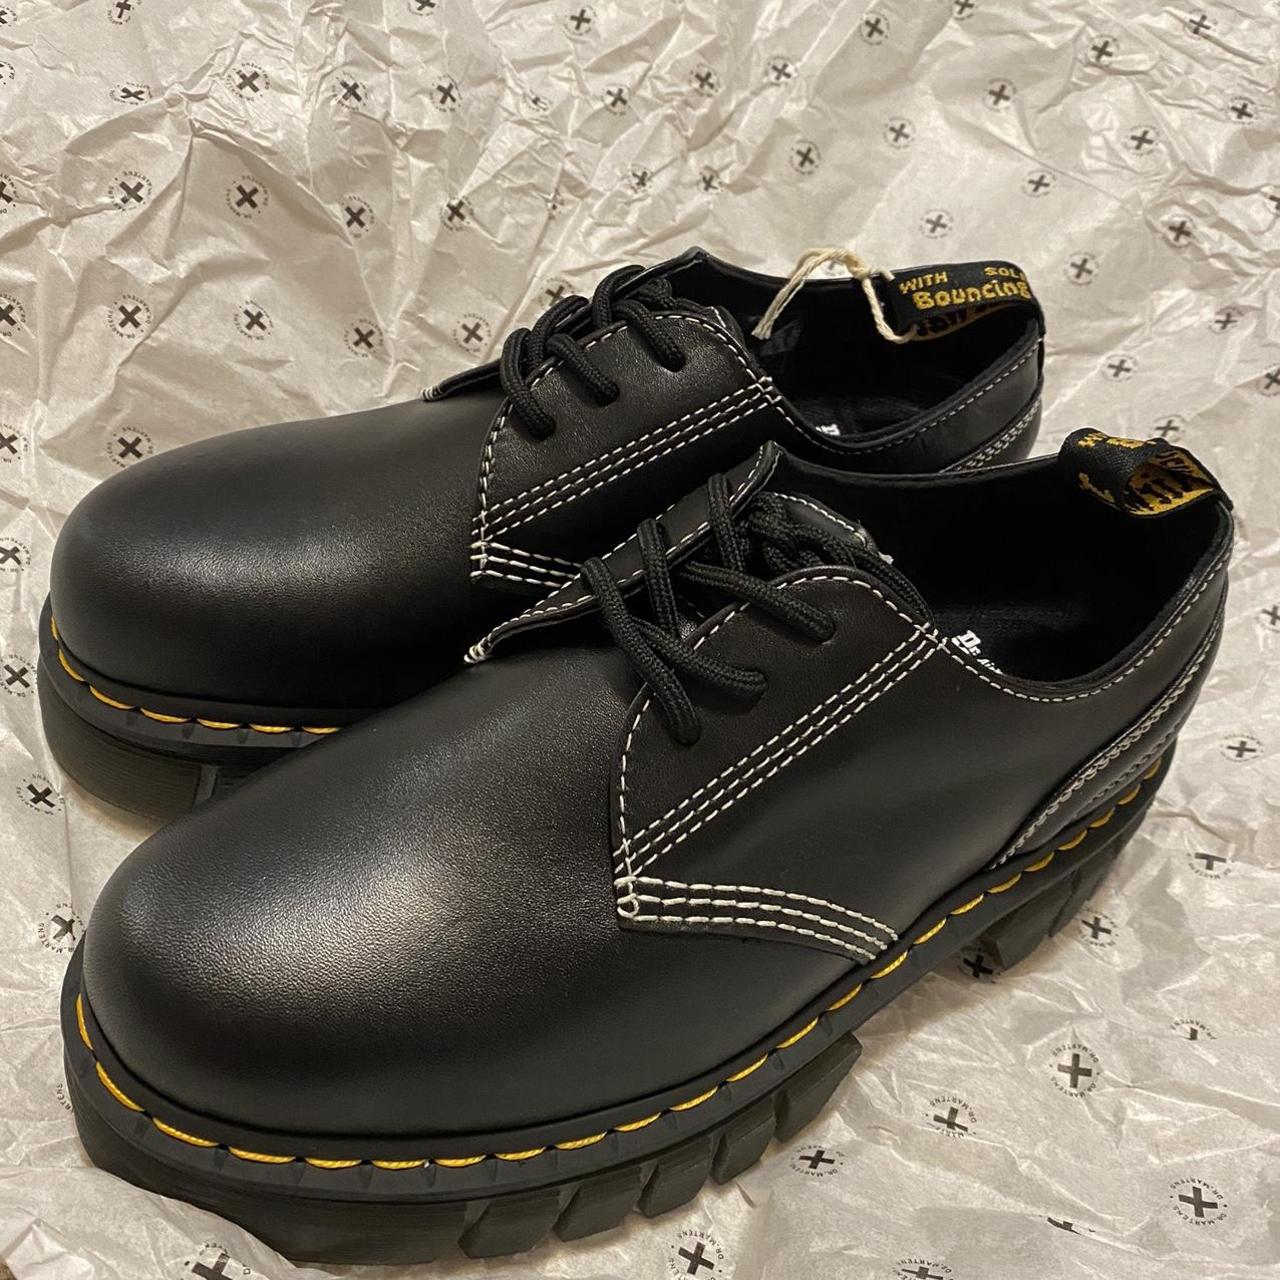 Dr. Martens Women's Black and White Boots (4)